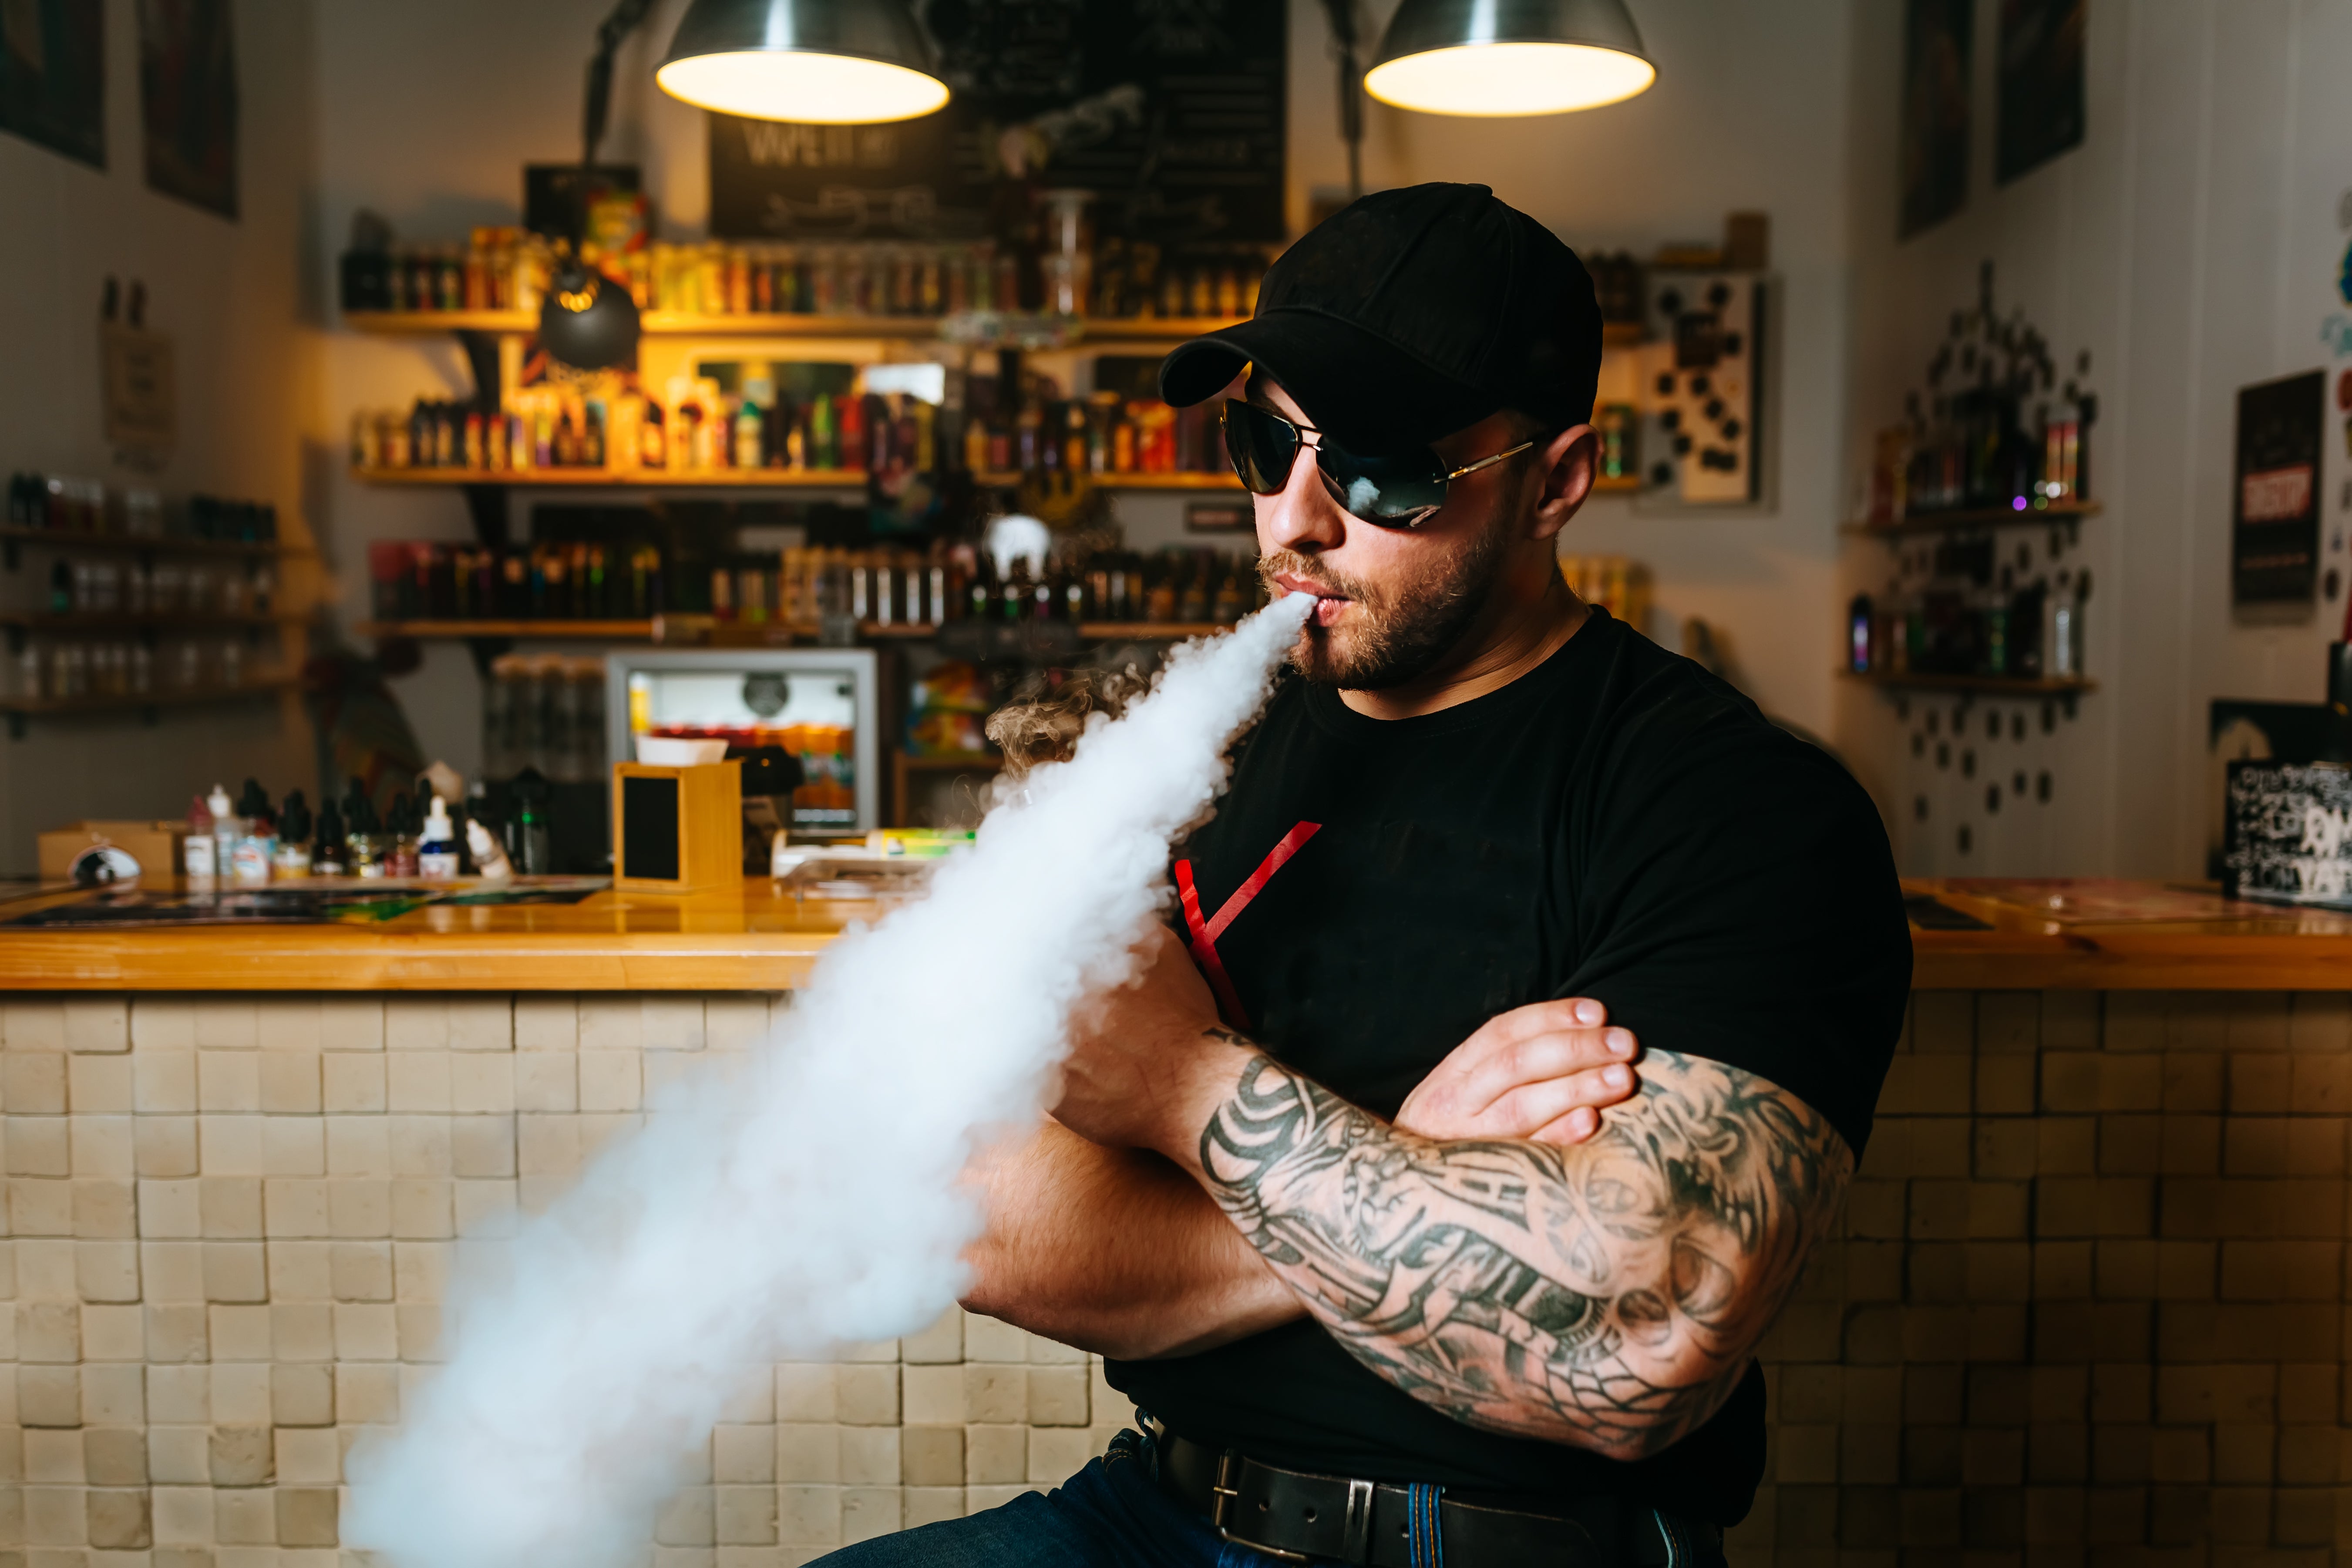 The government has announced plans to ban disposable vapes by the end of 2025